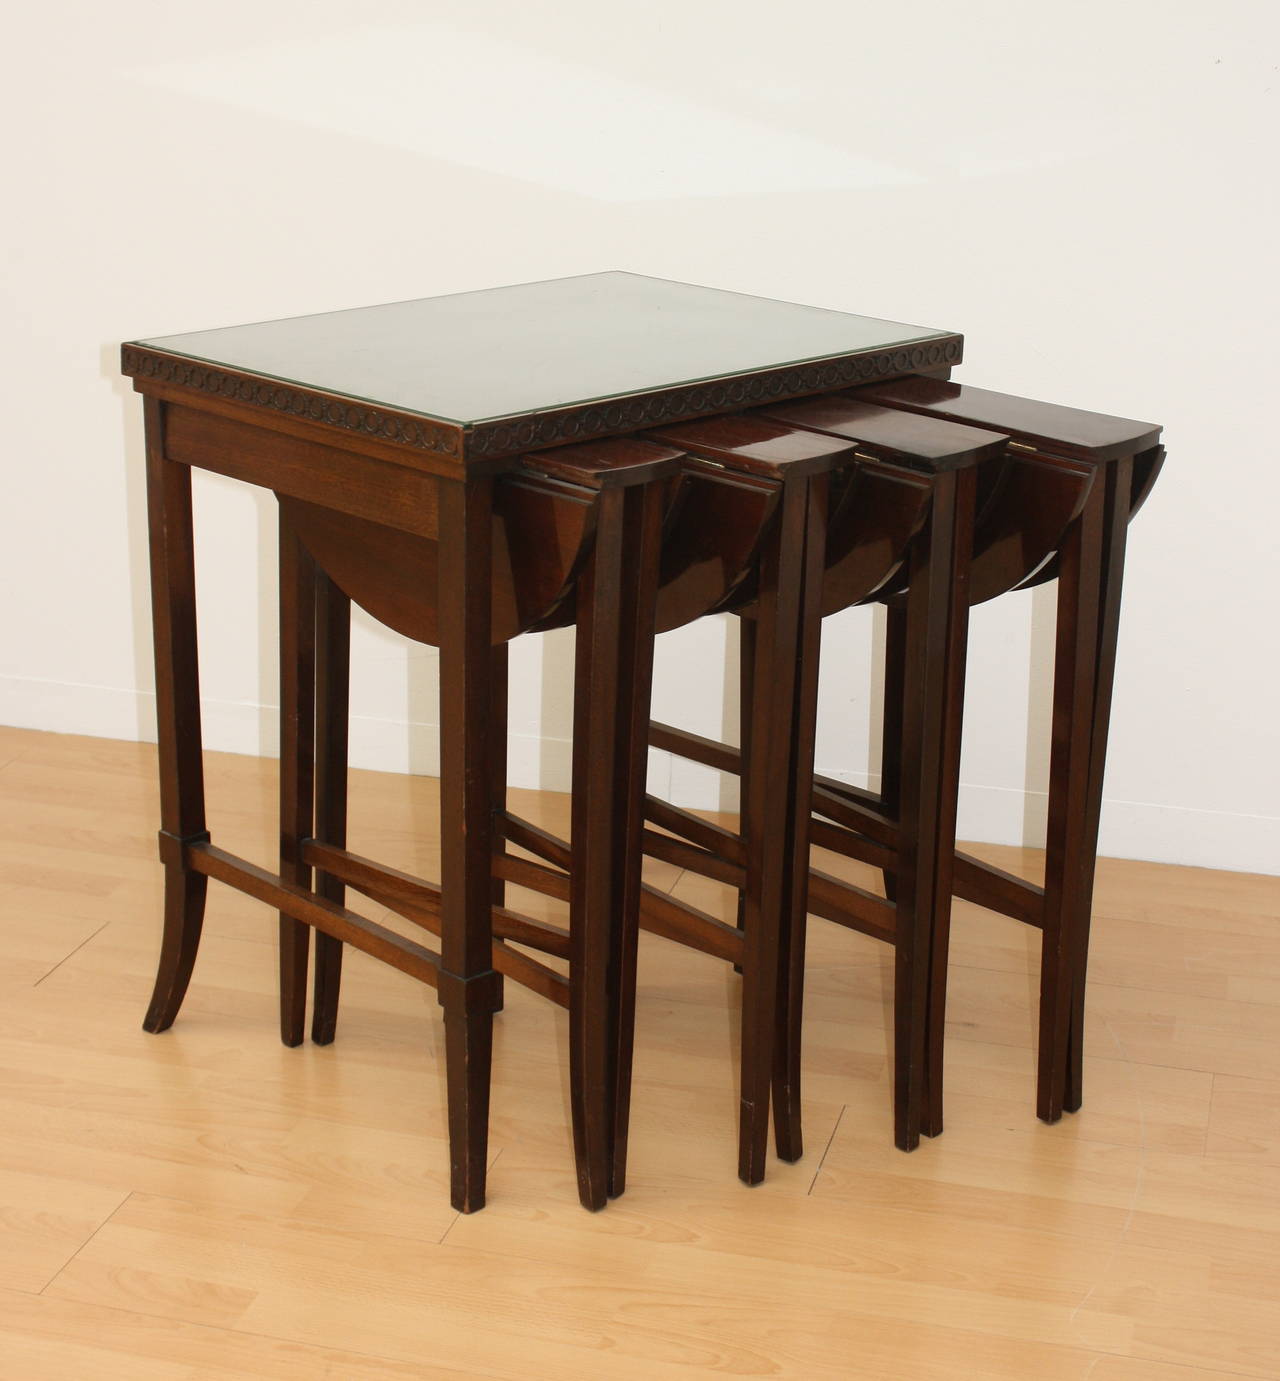 Useful mahogany end Table with glas top and four rounded drop-leaf nesting tables.
Each round Table: Height: 73cm, Diameter: 49cm.